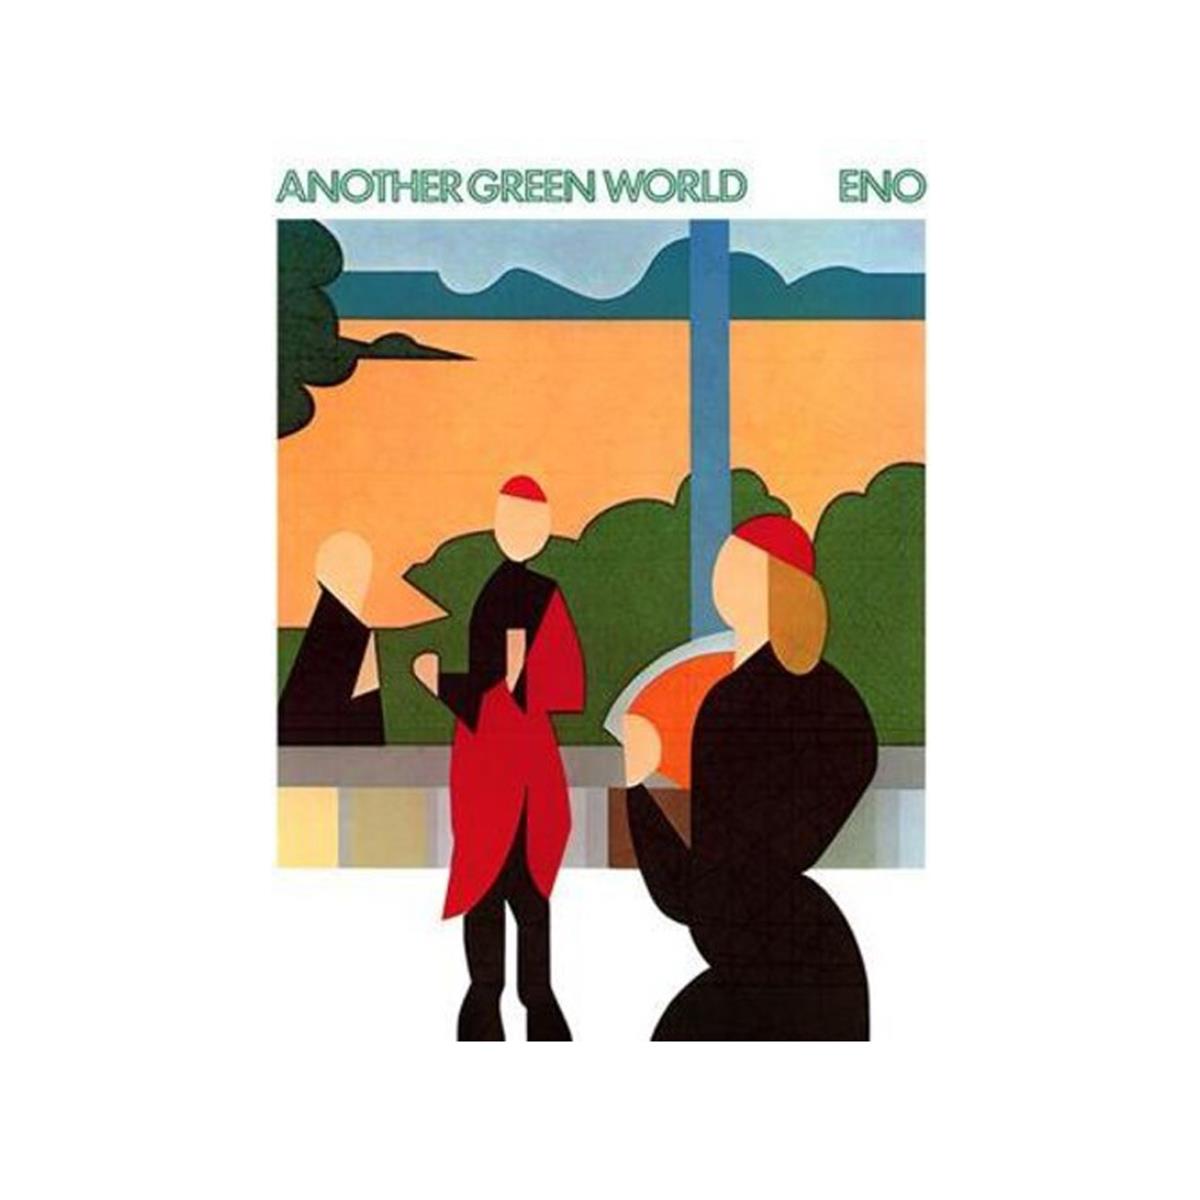 ENO 「Another Green World」（1975年発売）